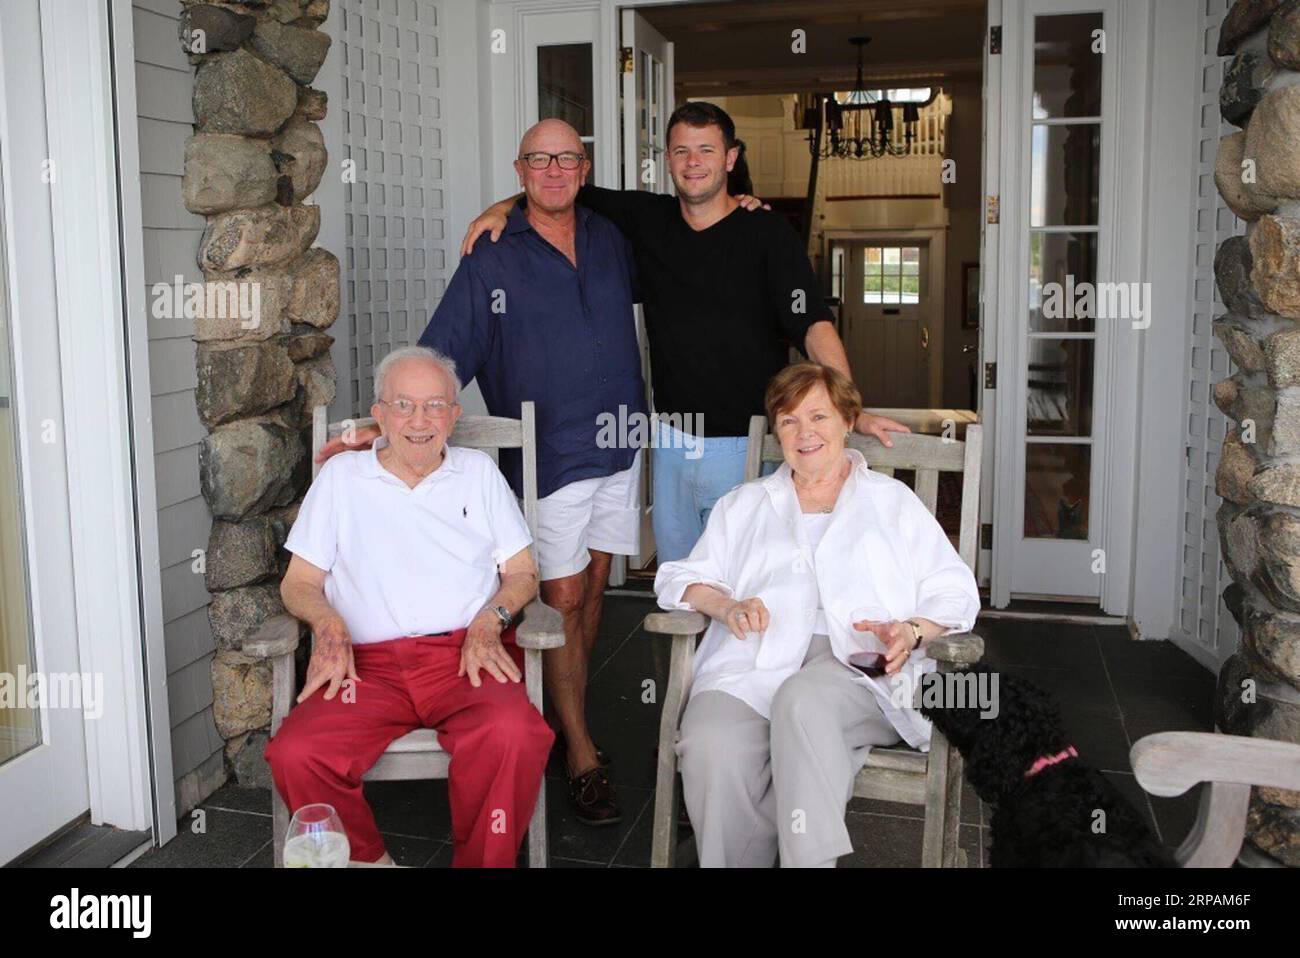 (190514) -- NEW YORK, May 14, 2019 -- James E. Bryant (L, front), his wife Dorothy Bryant (R, front), son James Bryant (L, rear) and grandson Ben Bryant are pictured in Marblehead, Massachusetts, the United States, 2015. James Bryant will never forget the day when his 93-year-old father went back to his bedroom and came back with a flight brief case containing papers related to the training and assignments he took as a U.S. Flying Tiger pilot during the World War II. As a remarkable yet humble man and a loving father, James E. Bryant did not show any detailed evidence about his war experience Stock Photo